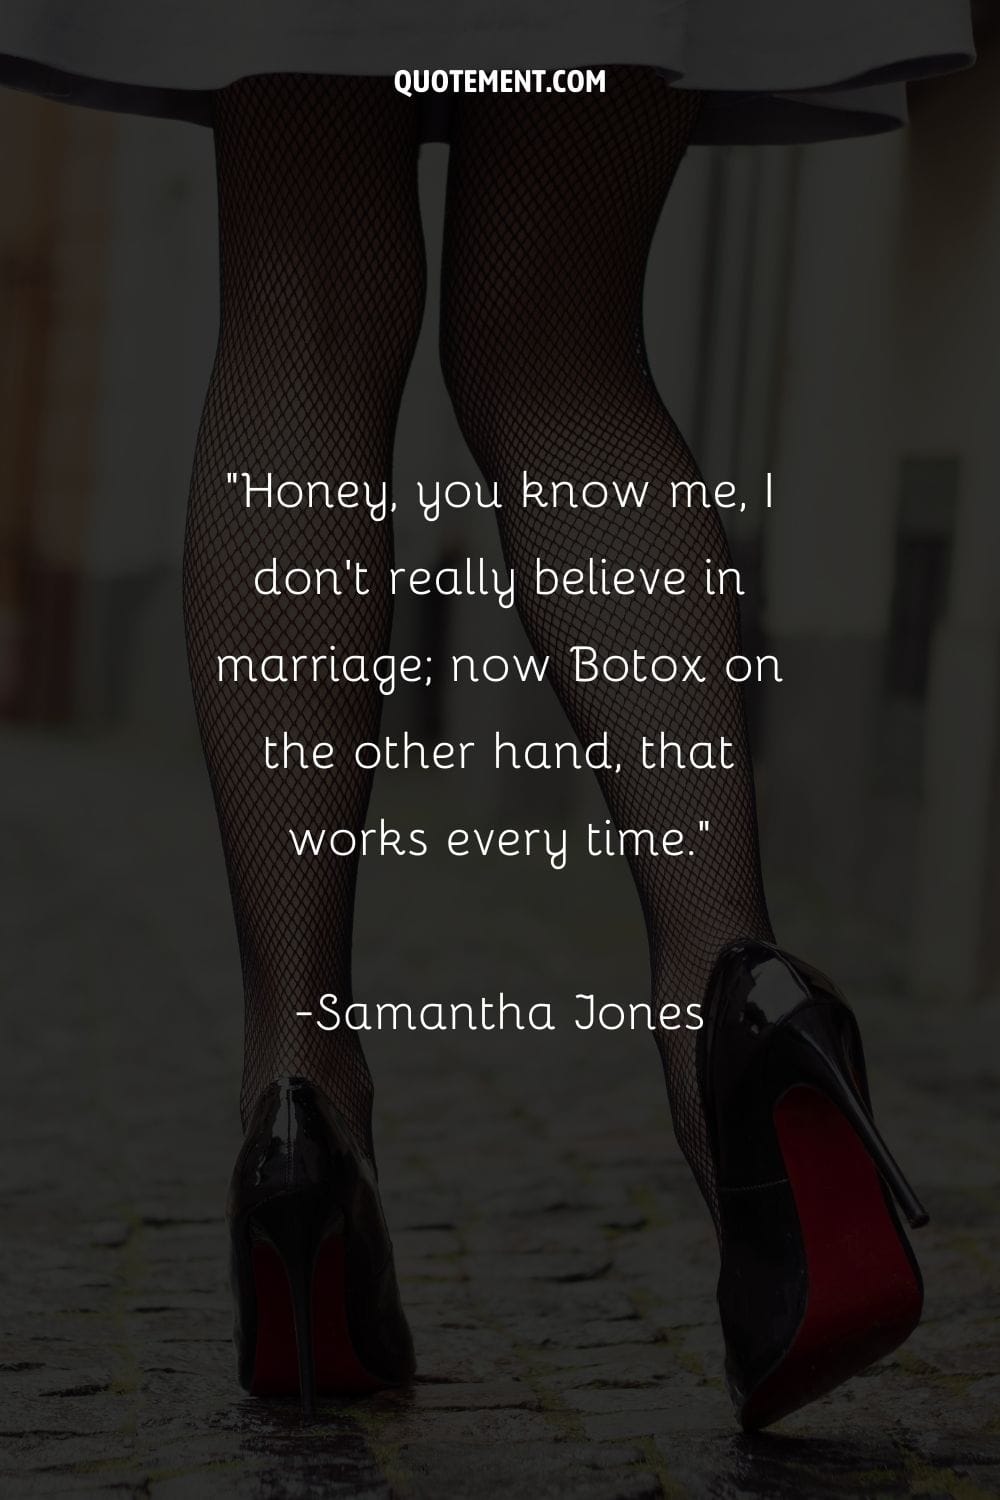 Image of legs accentuated by high heels representing a quote on marriage.